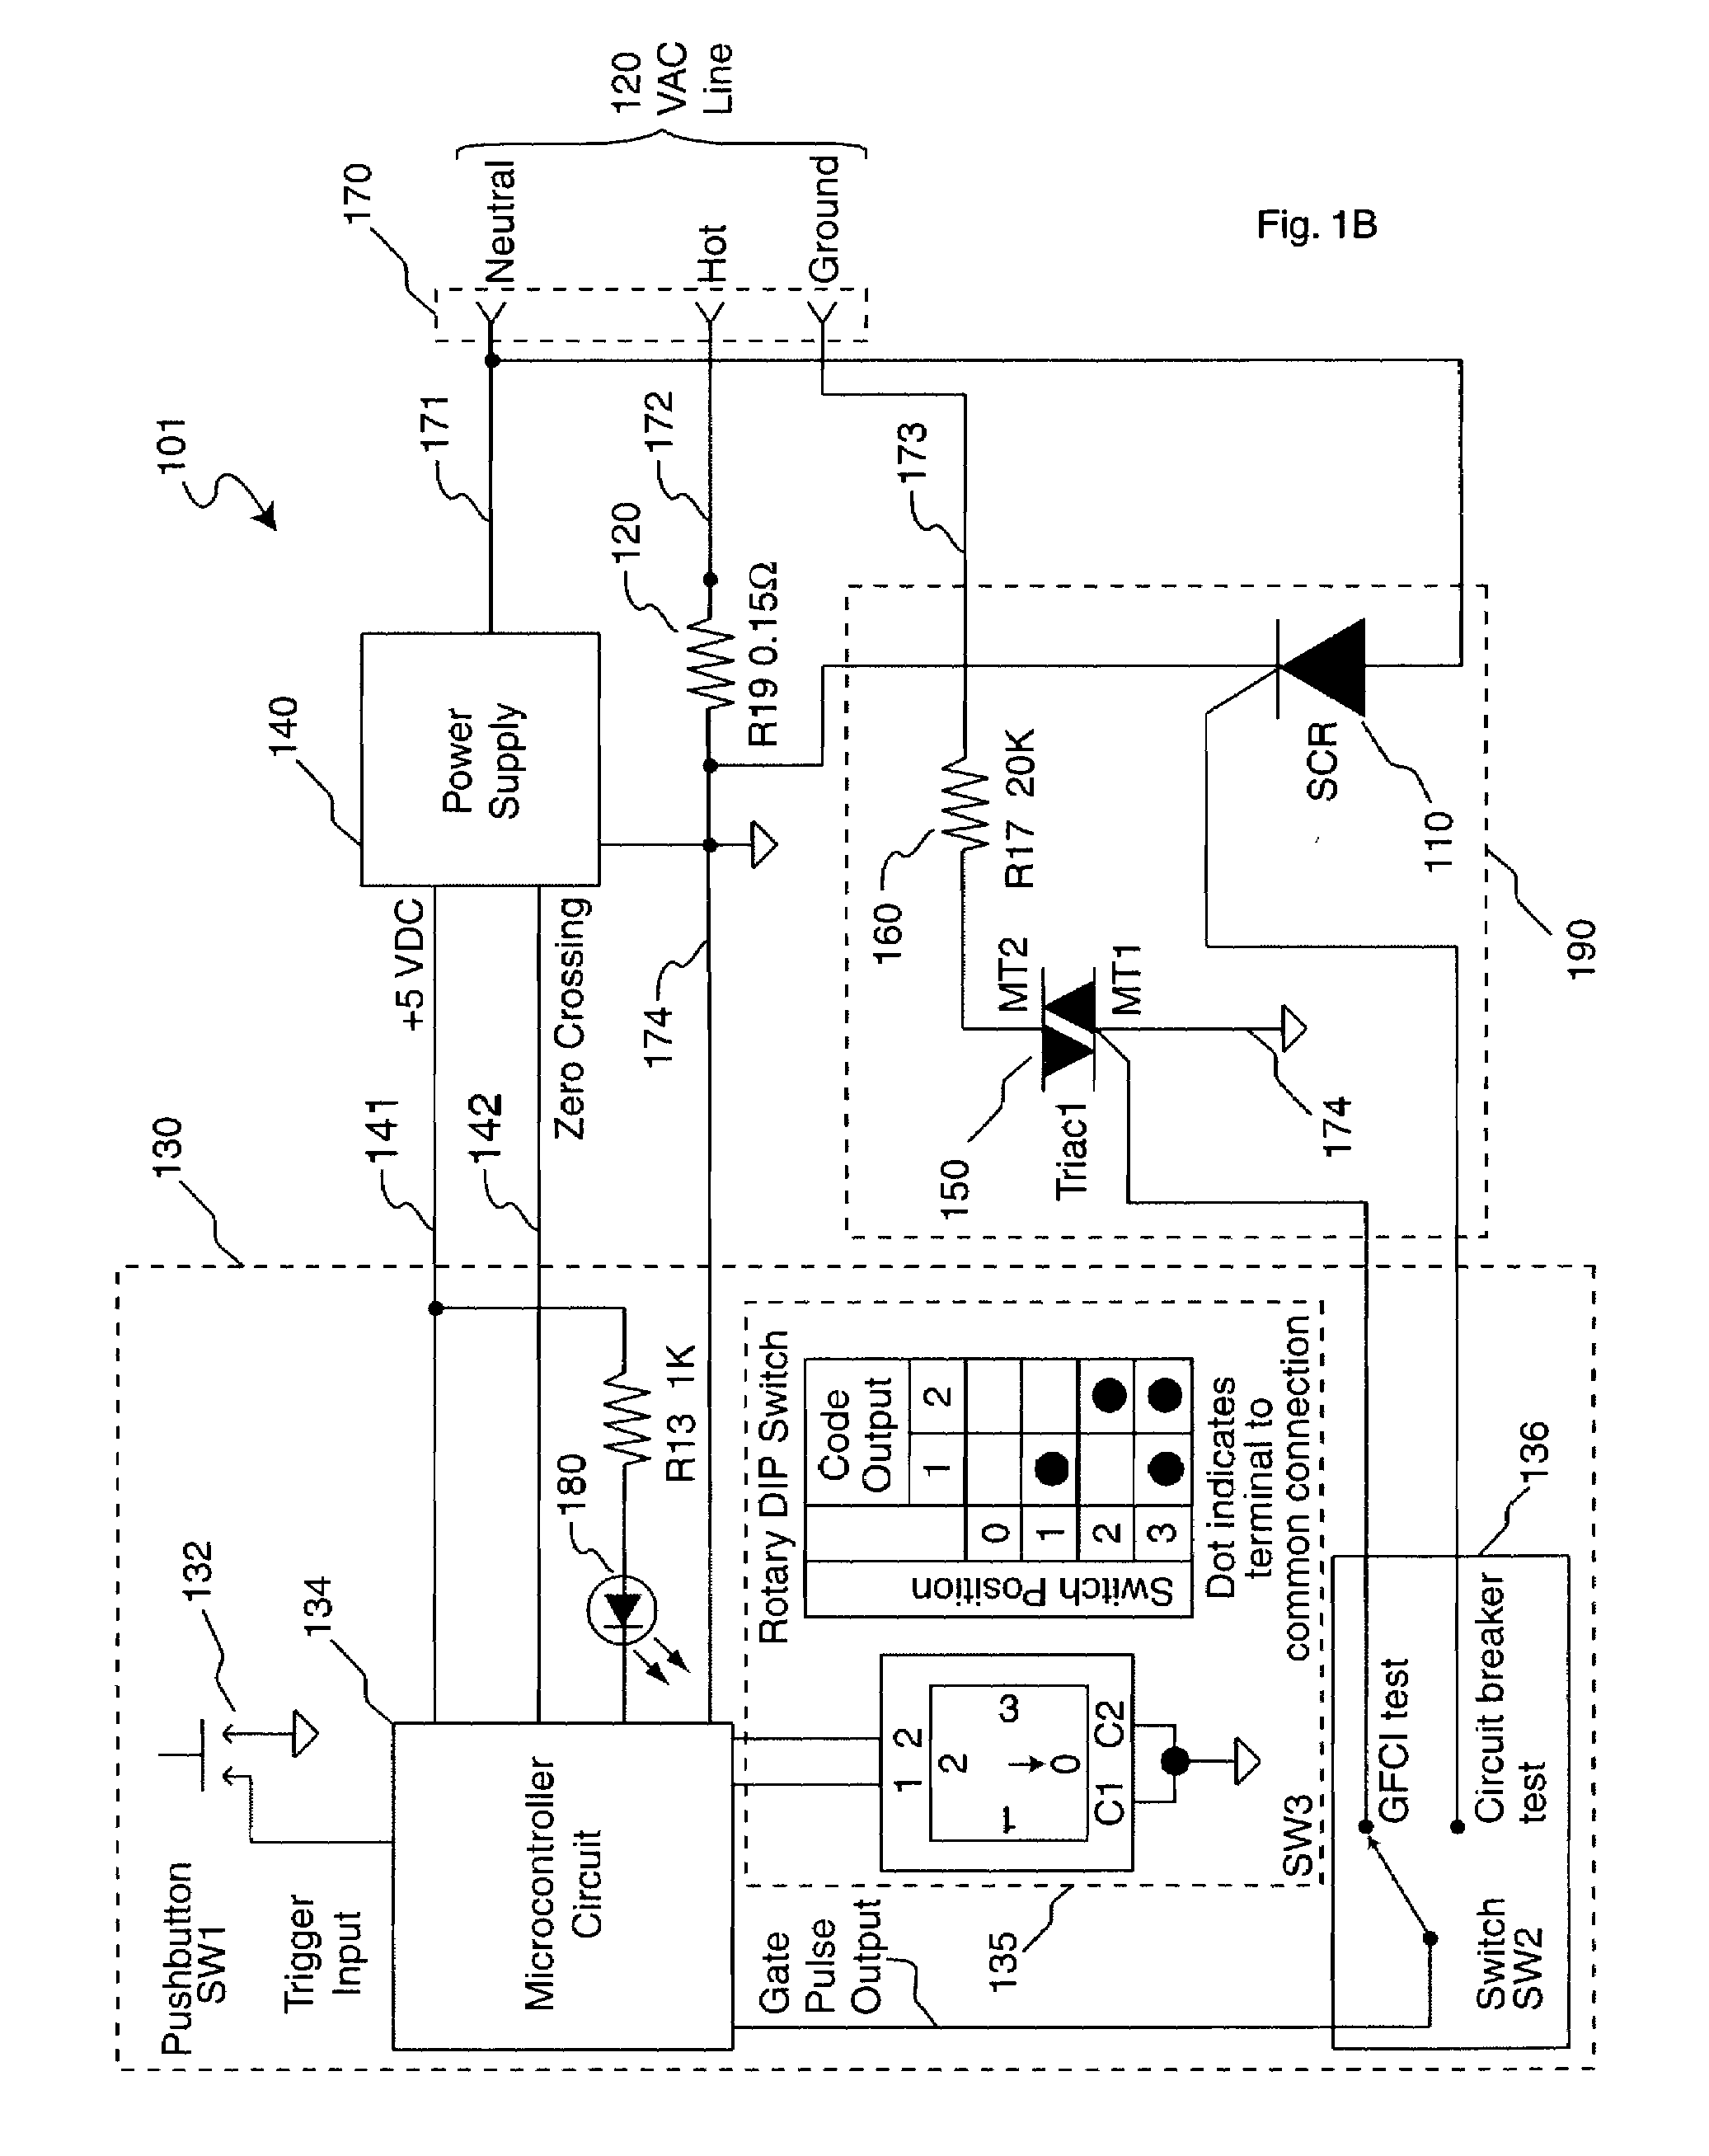 Portable circuit interrupter shutoff testing device and method